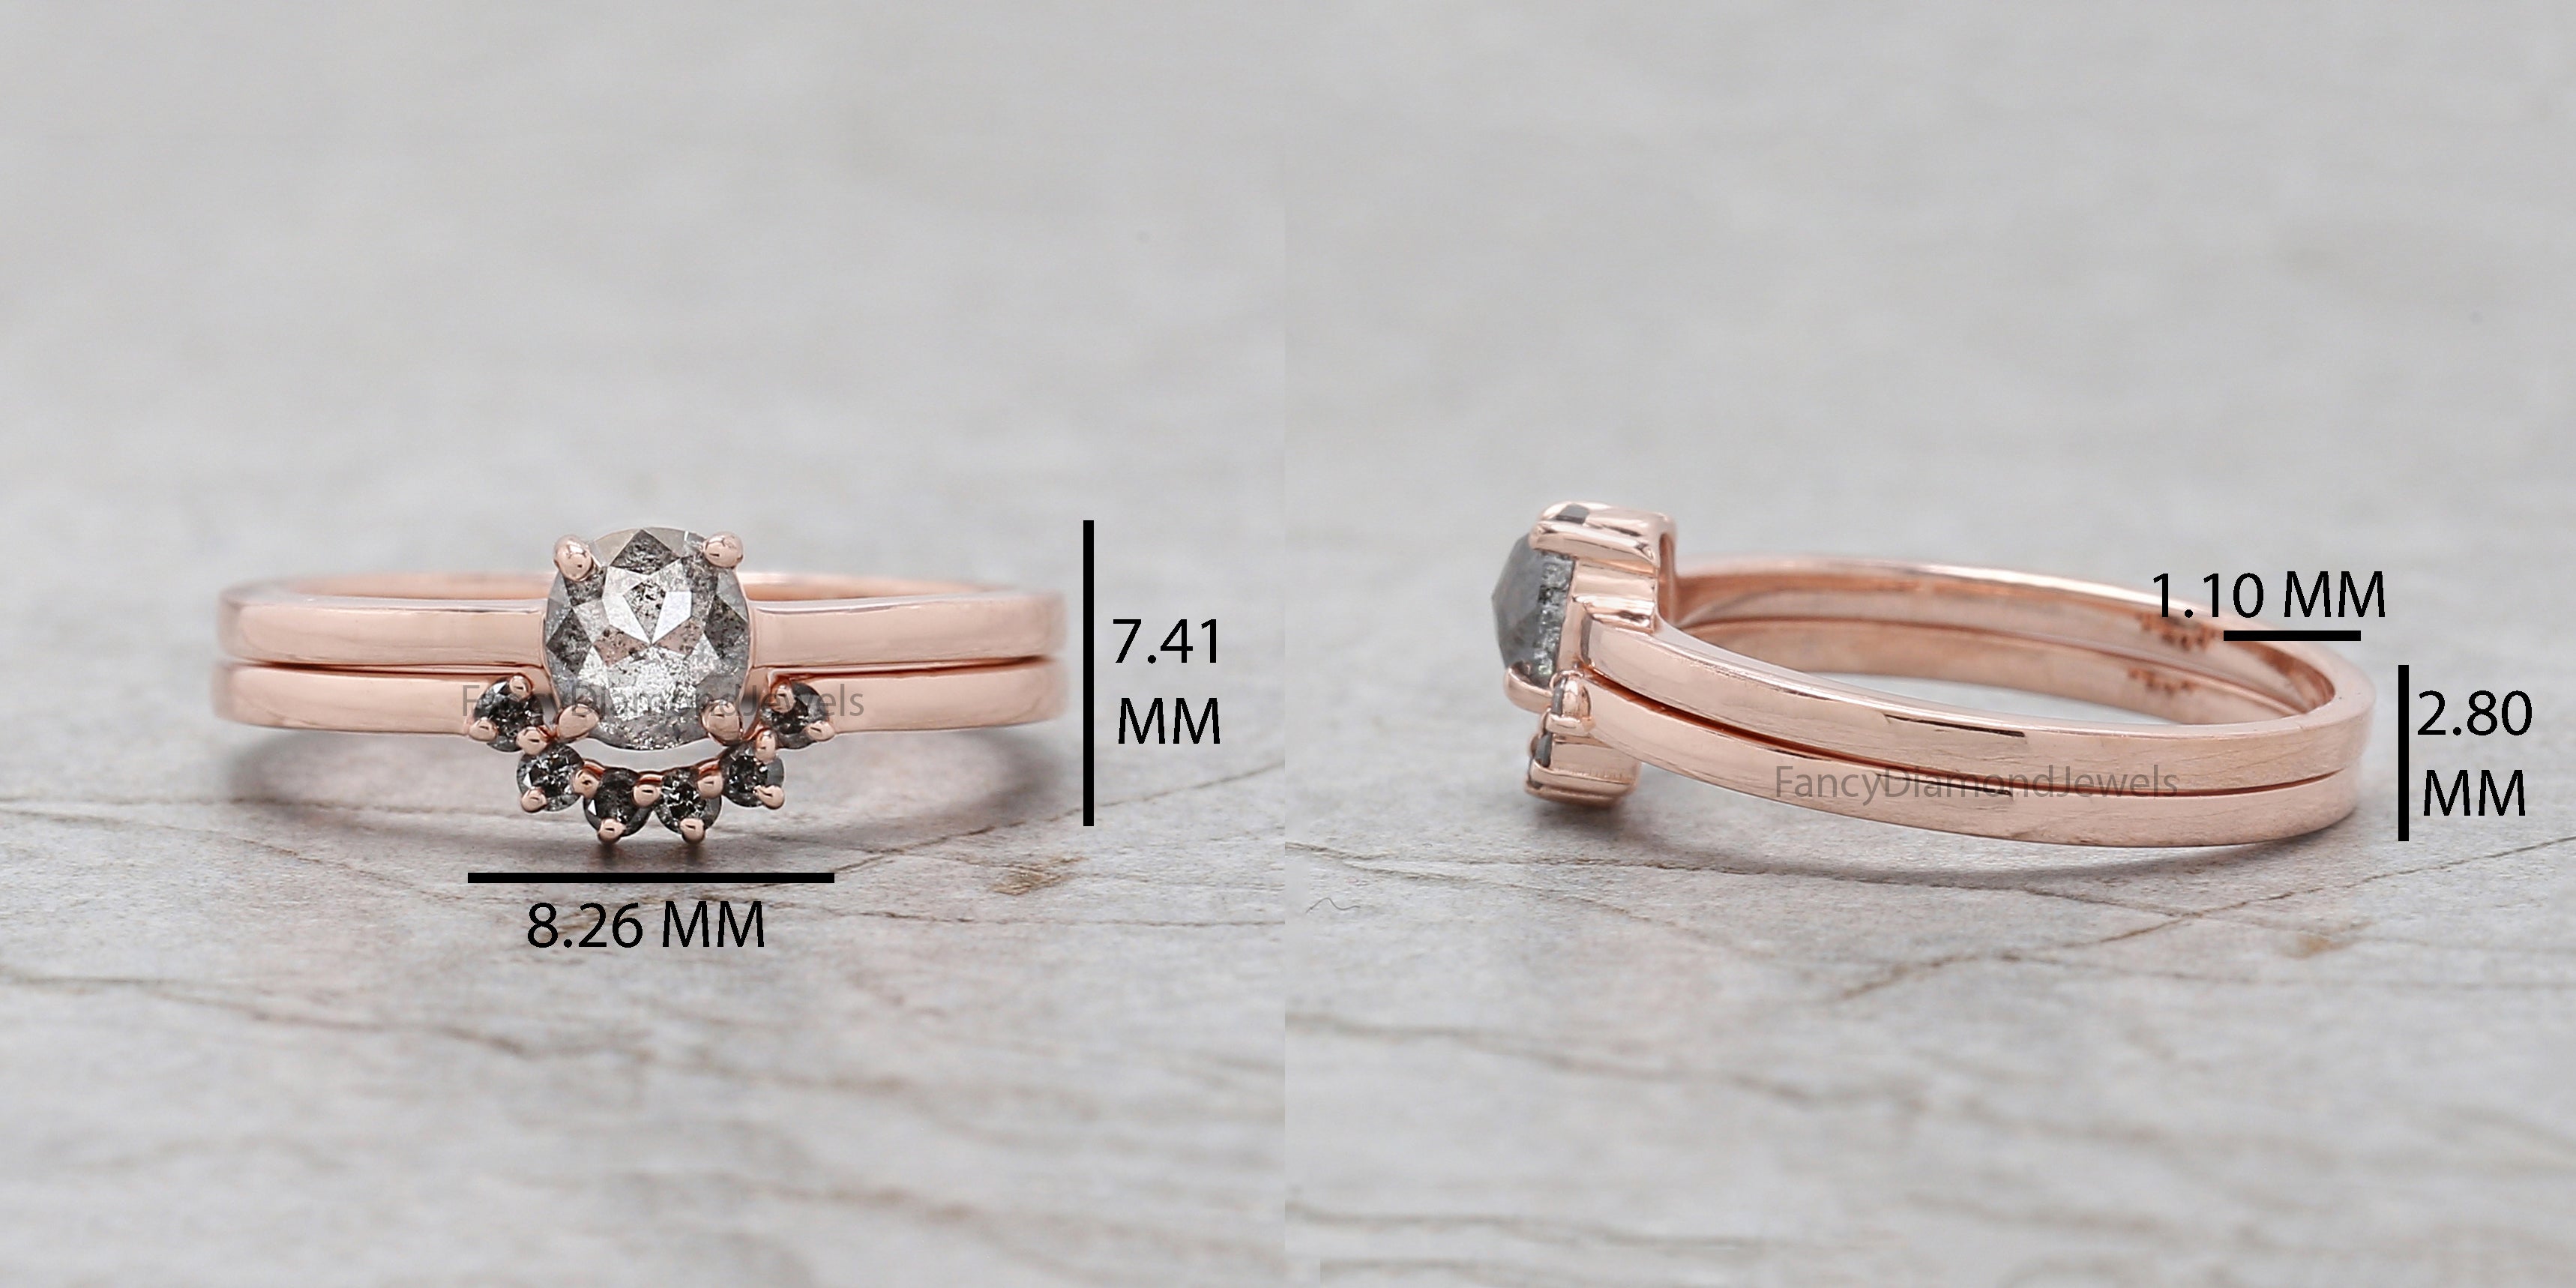 Oval Cut Salt And Pepper Diamond Ring 0.57 Ct 4.95 MM Oval Diamond Ring 14K Solid Rose Gold Silver Oval Engagement Ring Gift For Her QL9012